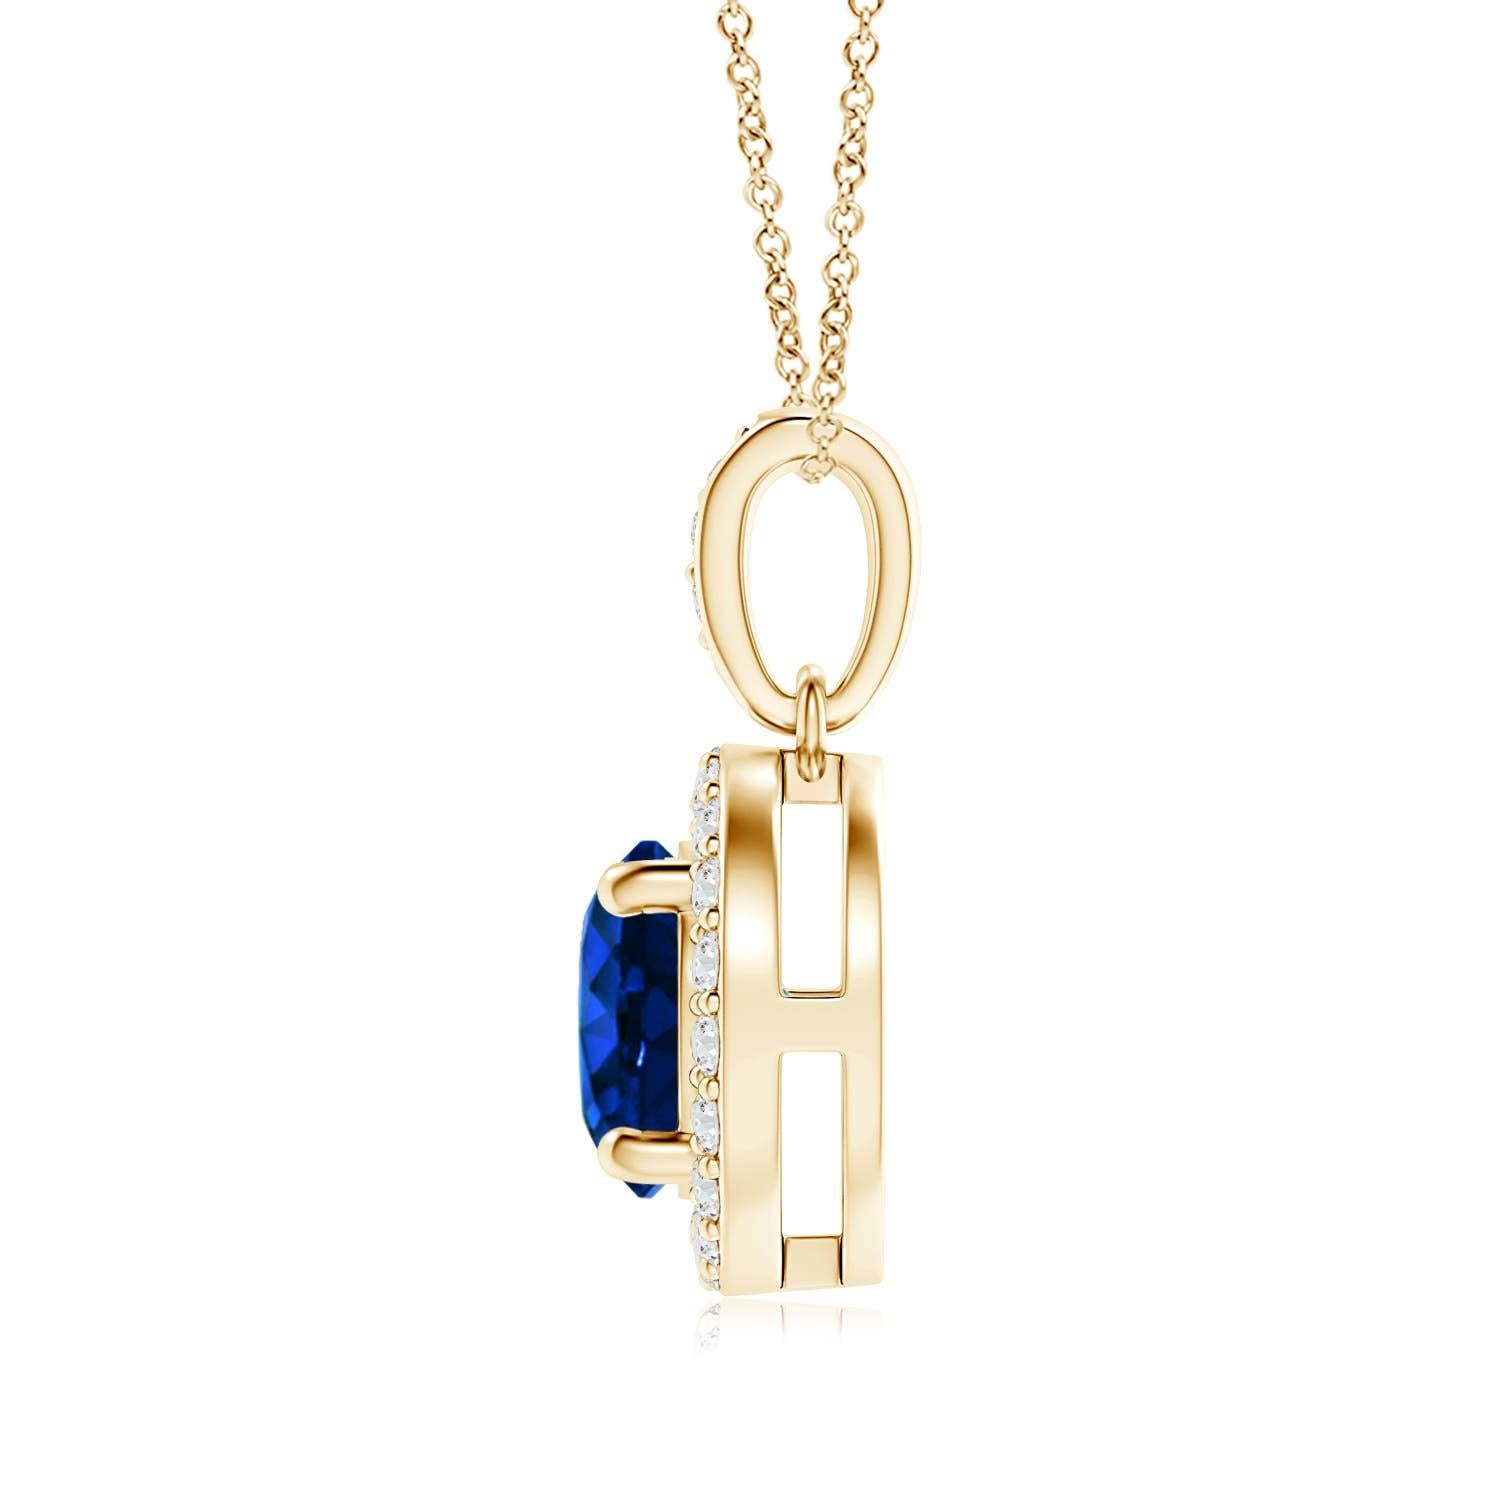 The GIA certified round blue sapphire is held in a prong setting and appears to be floating amid a dazzling diamond halo. There are additional diamond accents on the bale that elevate the elegant look of this 14K Yellow Gold pendant.
